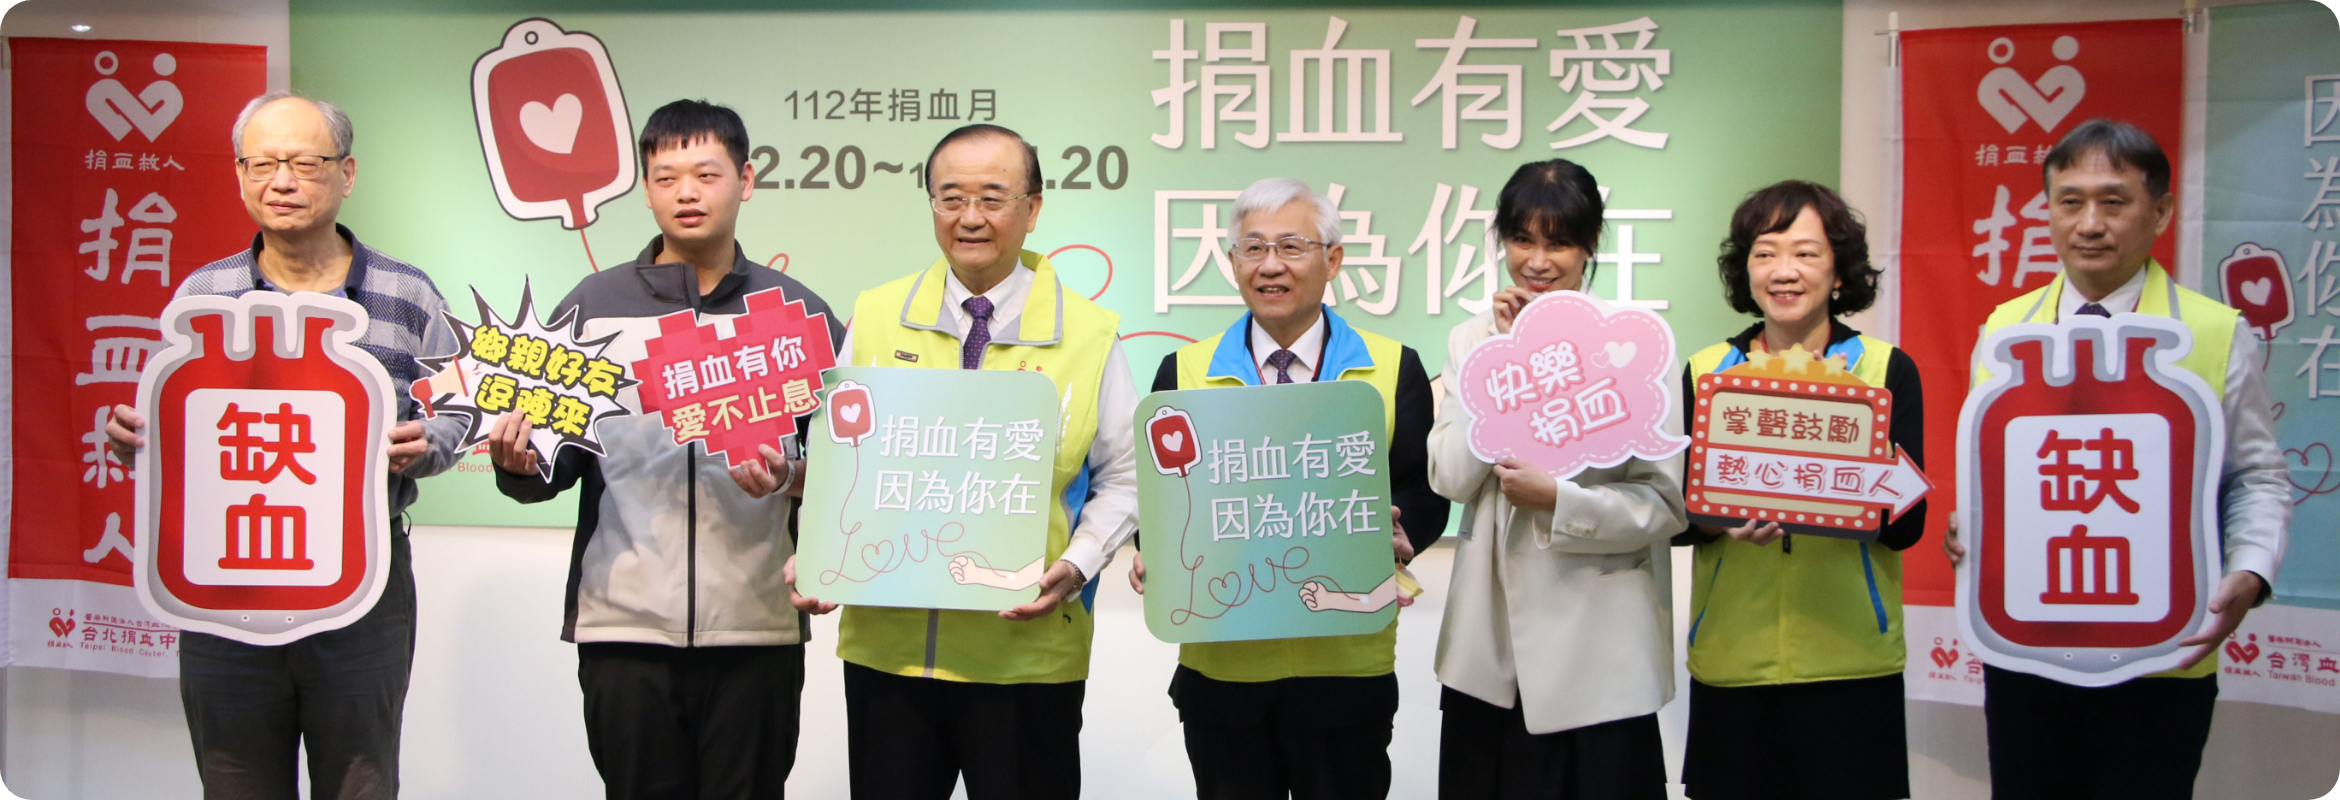 
From left to right: Blood donor Wen Chang-an, Wen Peng, Foundation Chairman Hou Sheng-mao, Foundation CEO Wei Sheng-tang, Kelly Brother from the village, Public Relations Department Director Li Lei, Business Department Director Hong Ying-sheng.